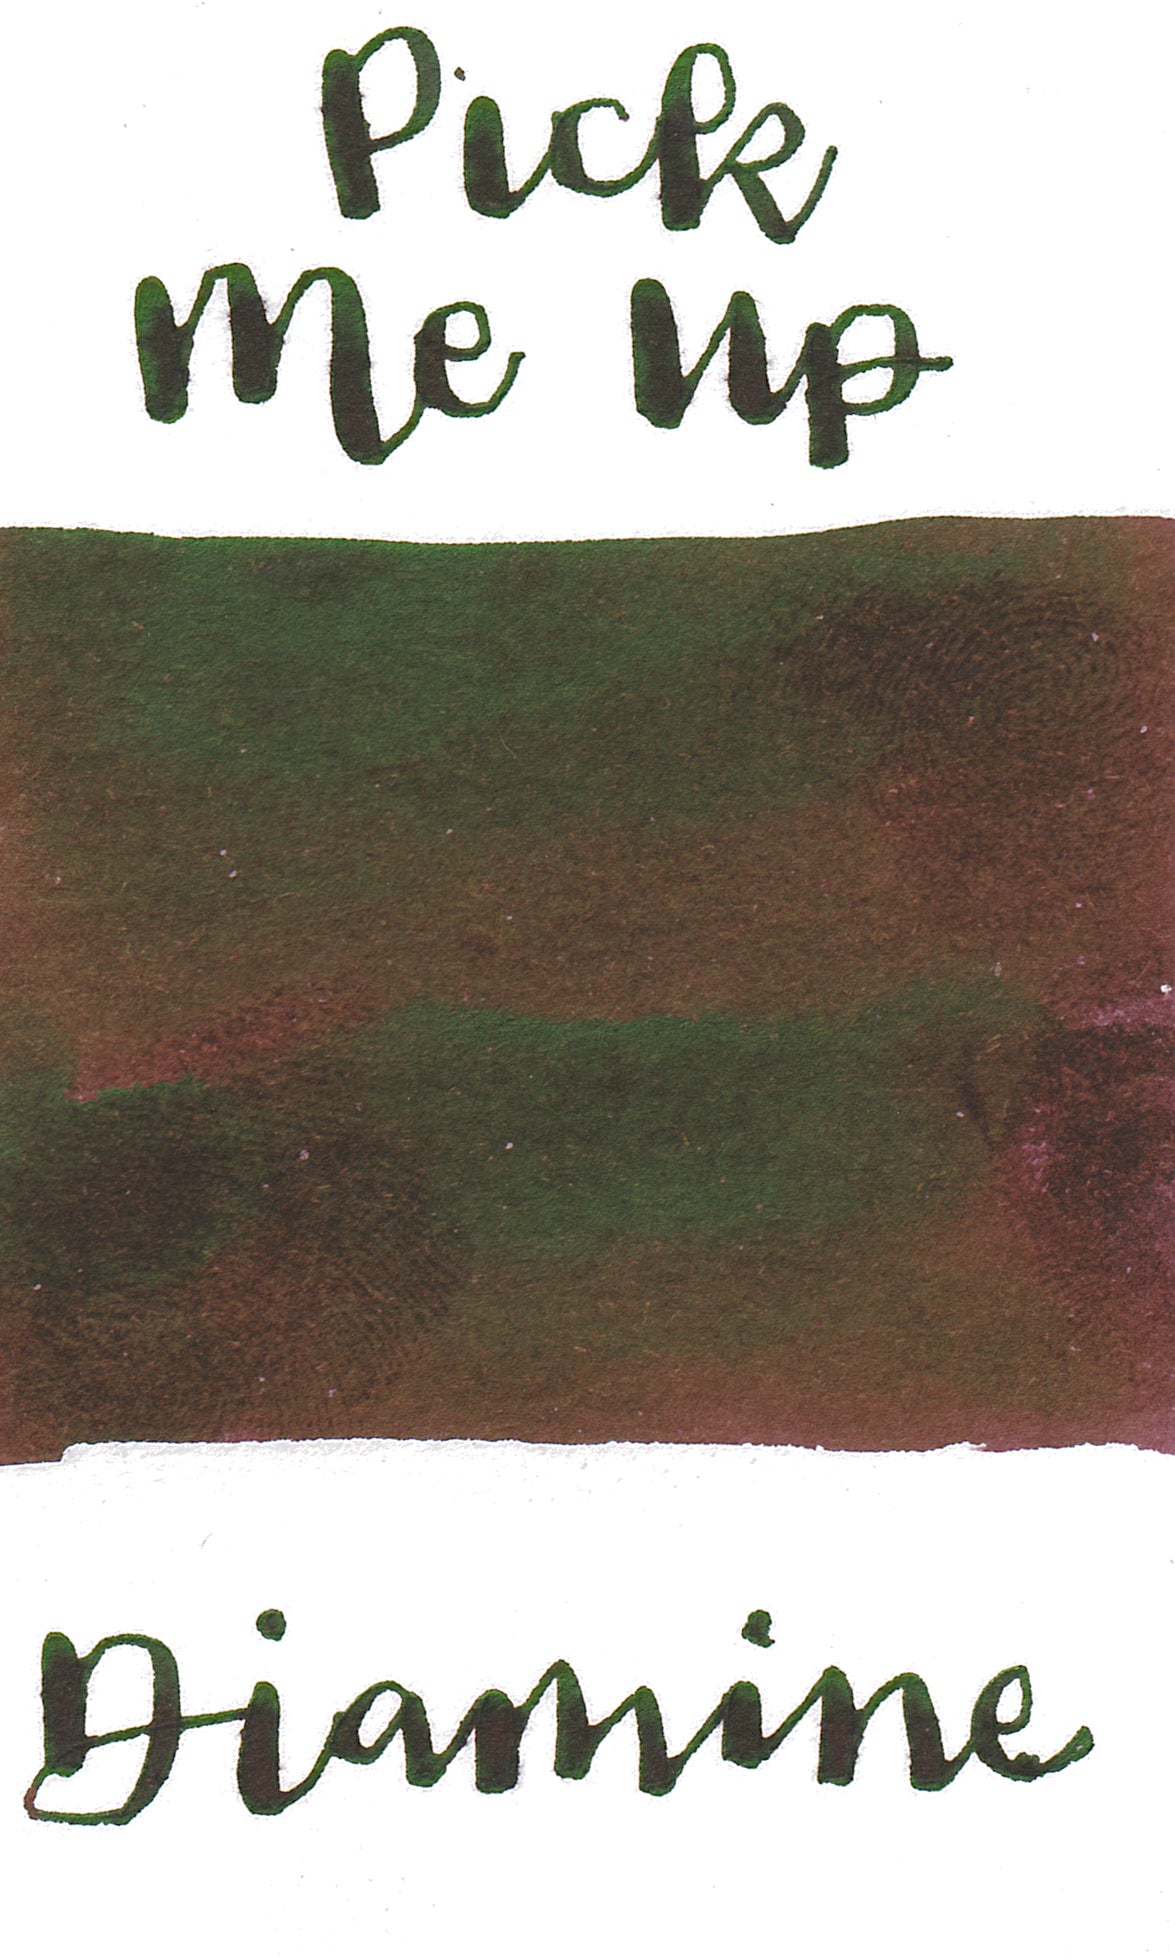 Diamine Green Edition Scented and Sheen Ink - Pick Me Up